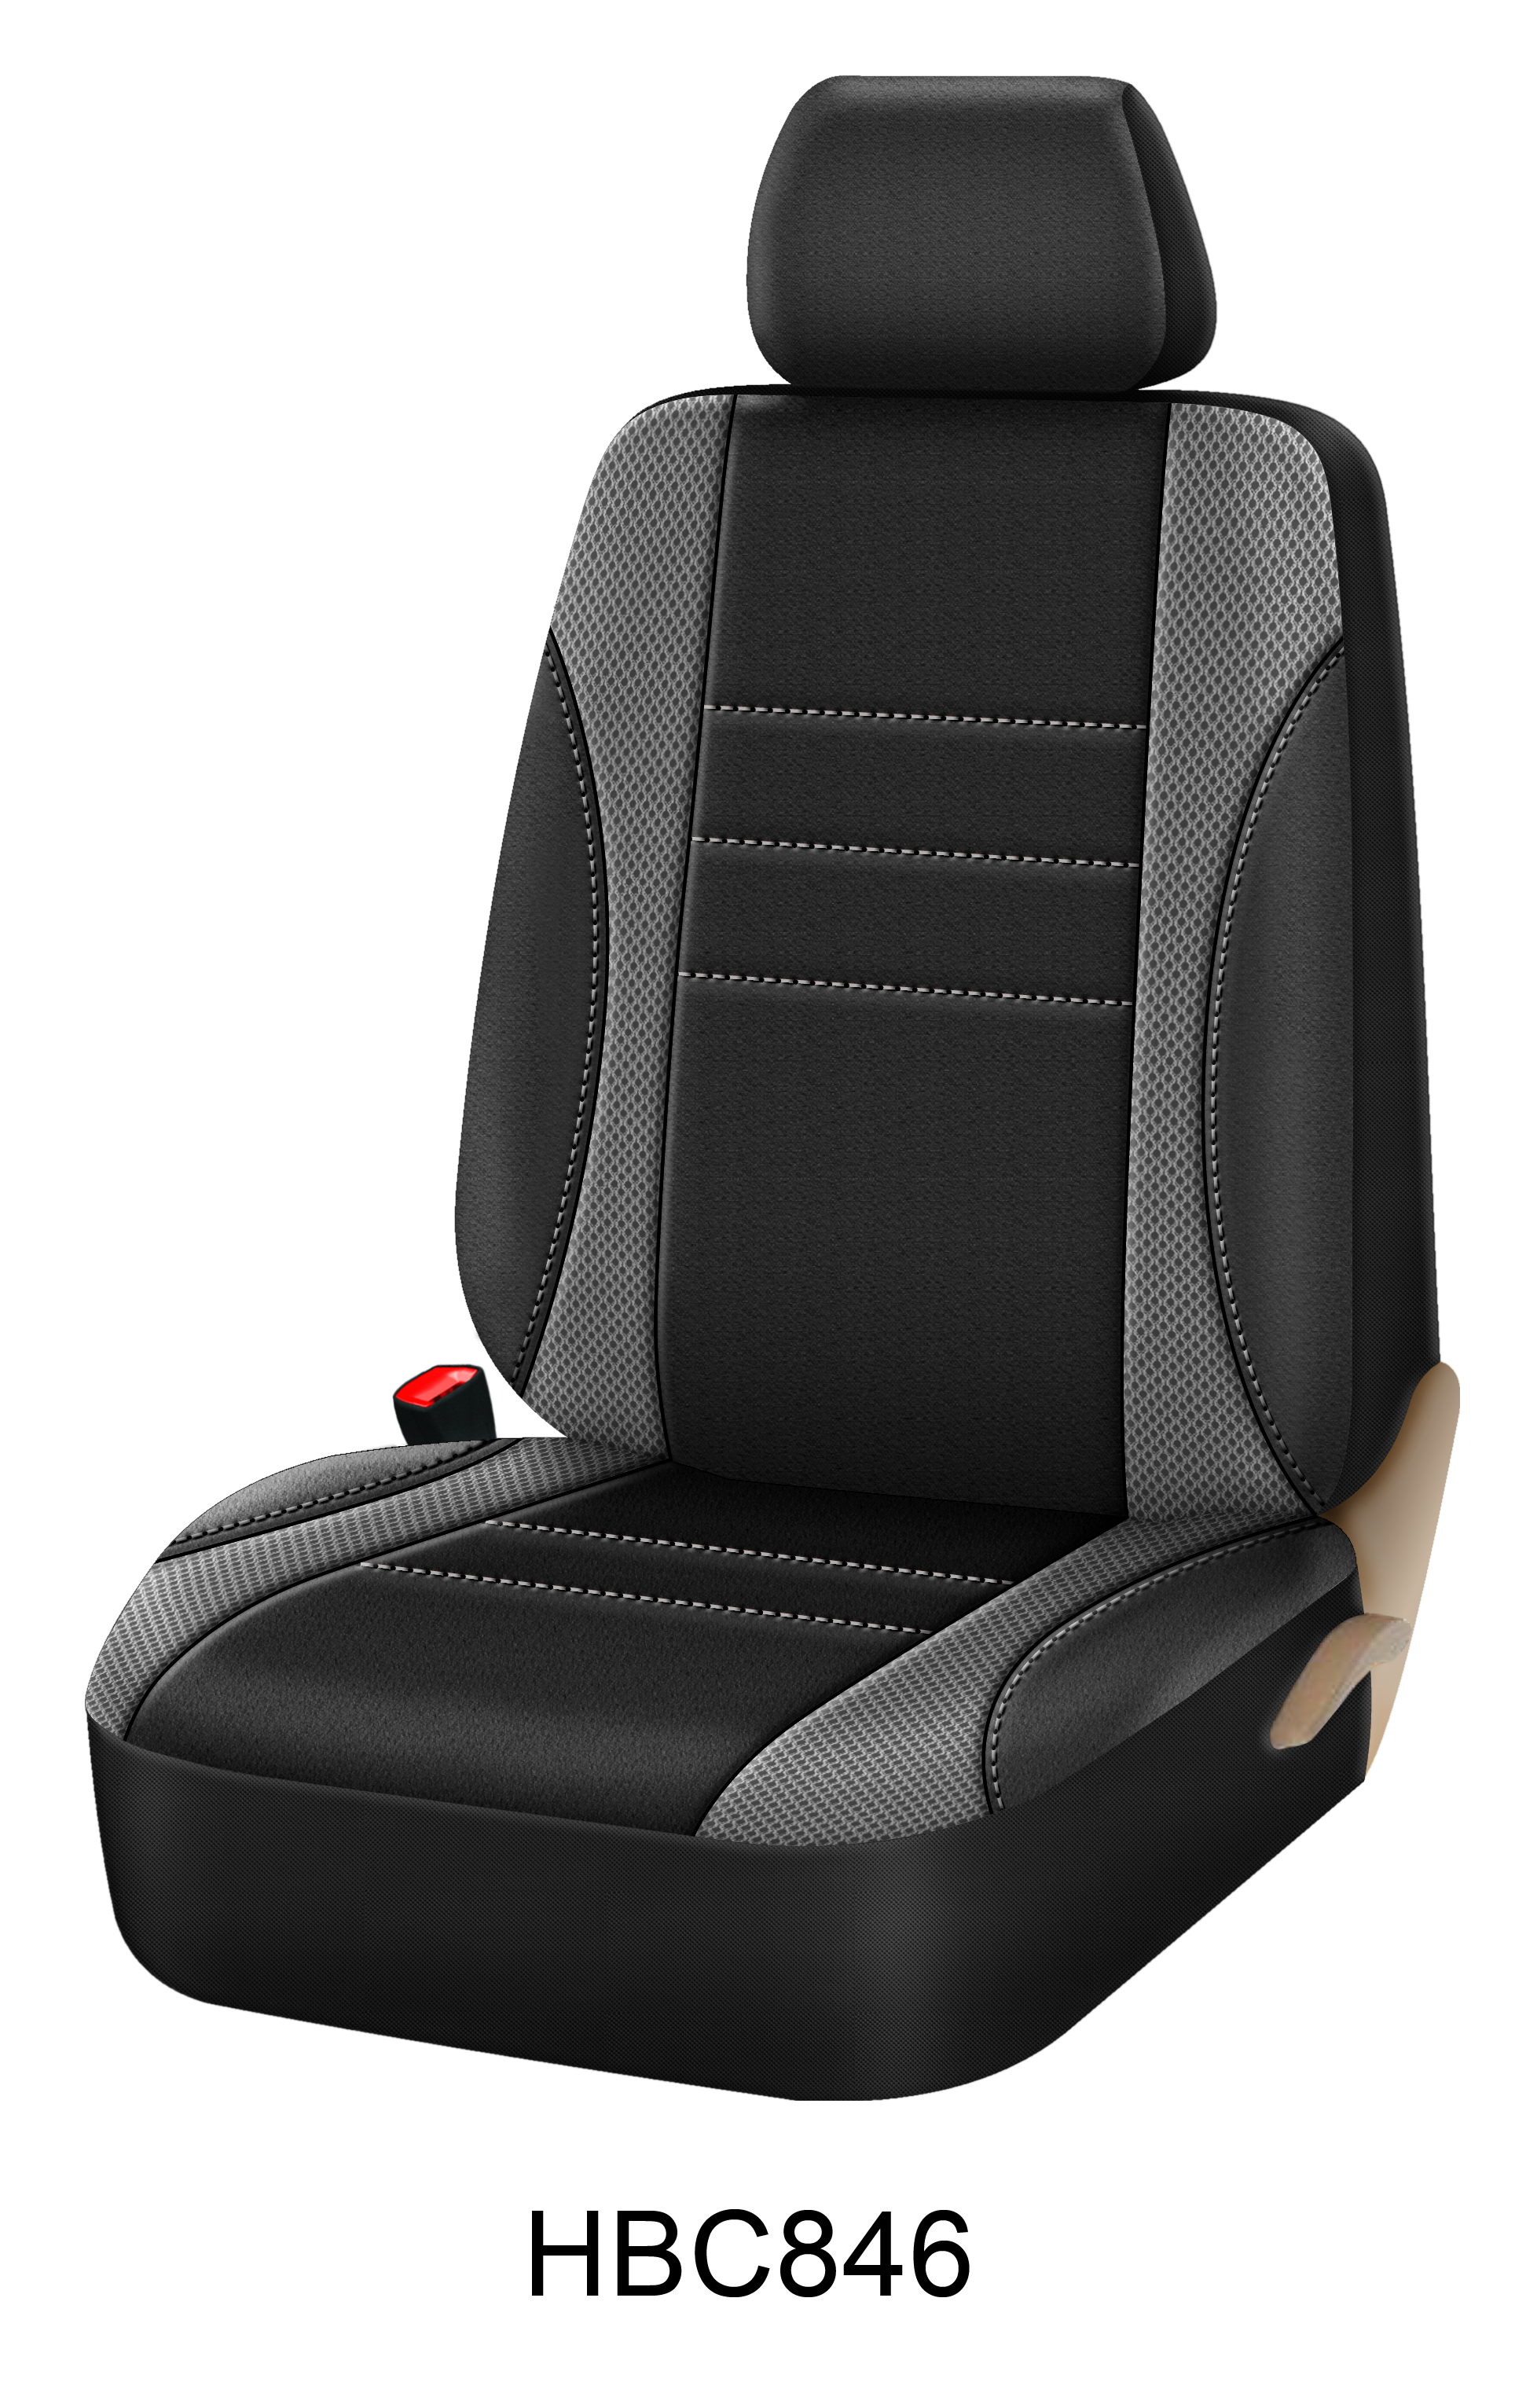 Universal Car Low Back  Seat Covers for Auto  Truck  Van  SUV - Airbag Compatible